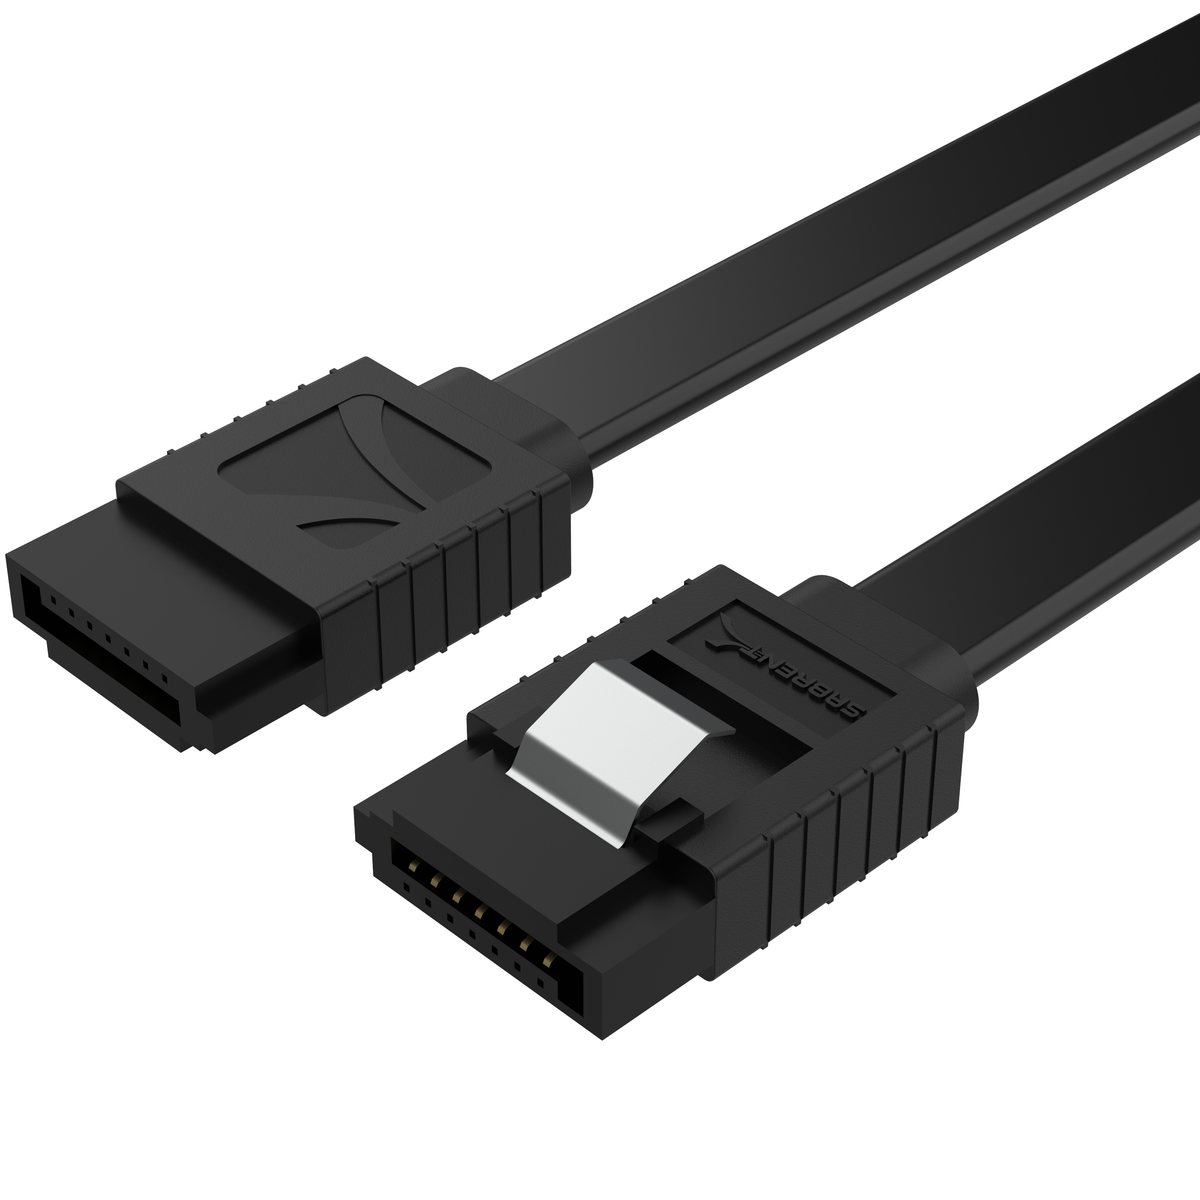 SATA III (6 Gbit/s) Straight Data Cable with Locking Latch for HDD / SSD / CD and DVD drives (3 Pack - 20-Inch)